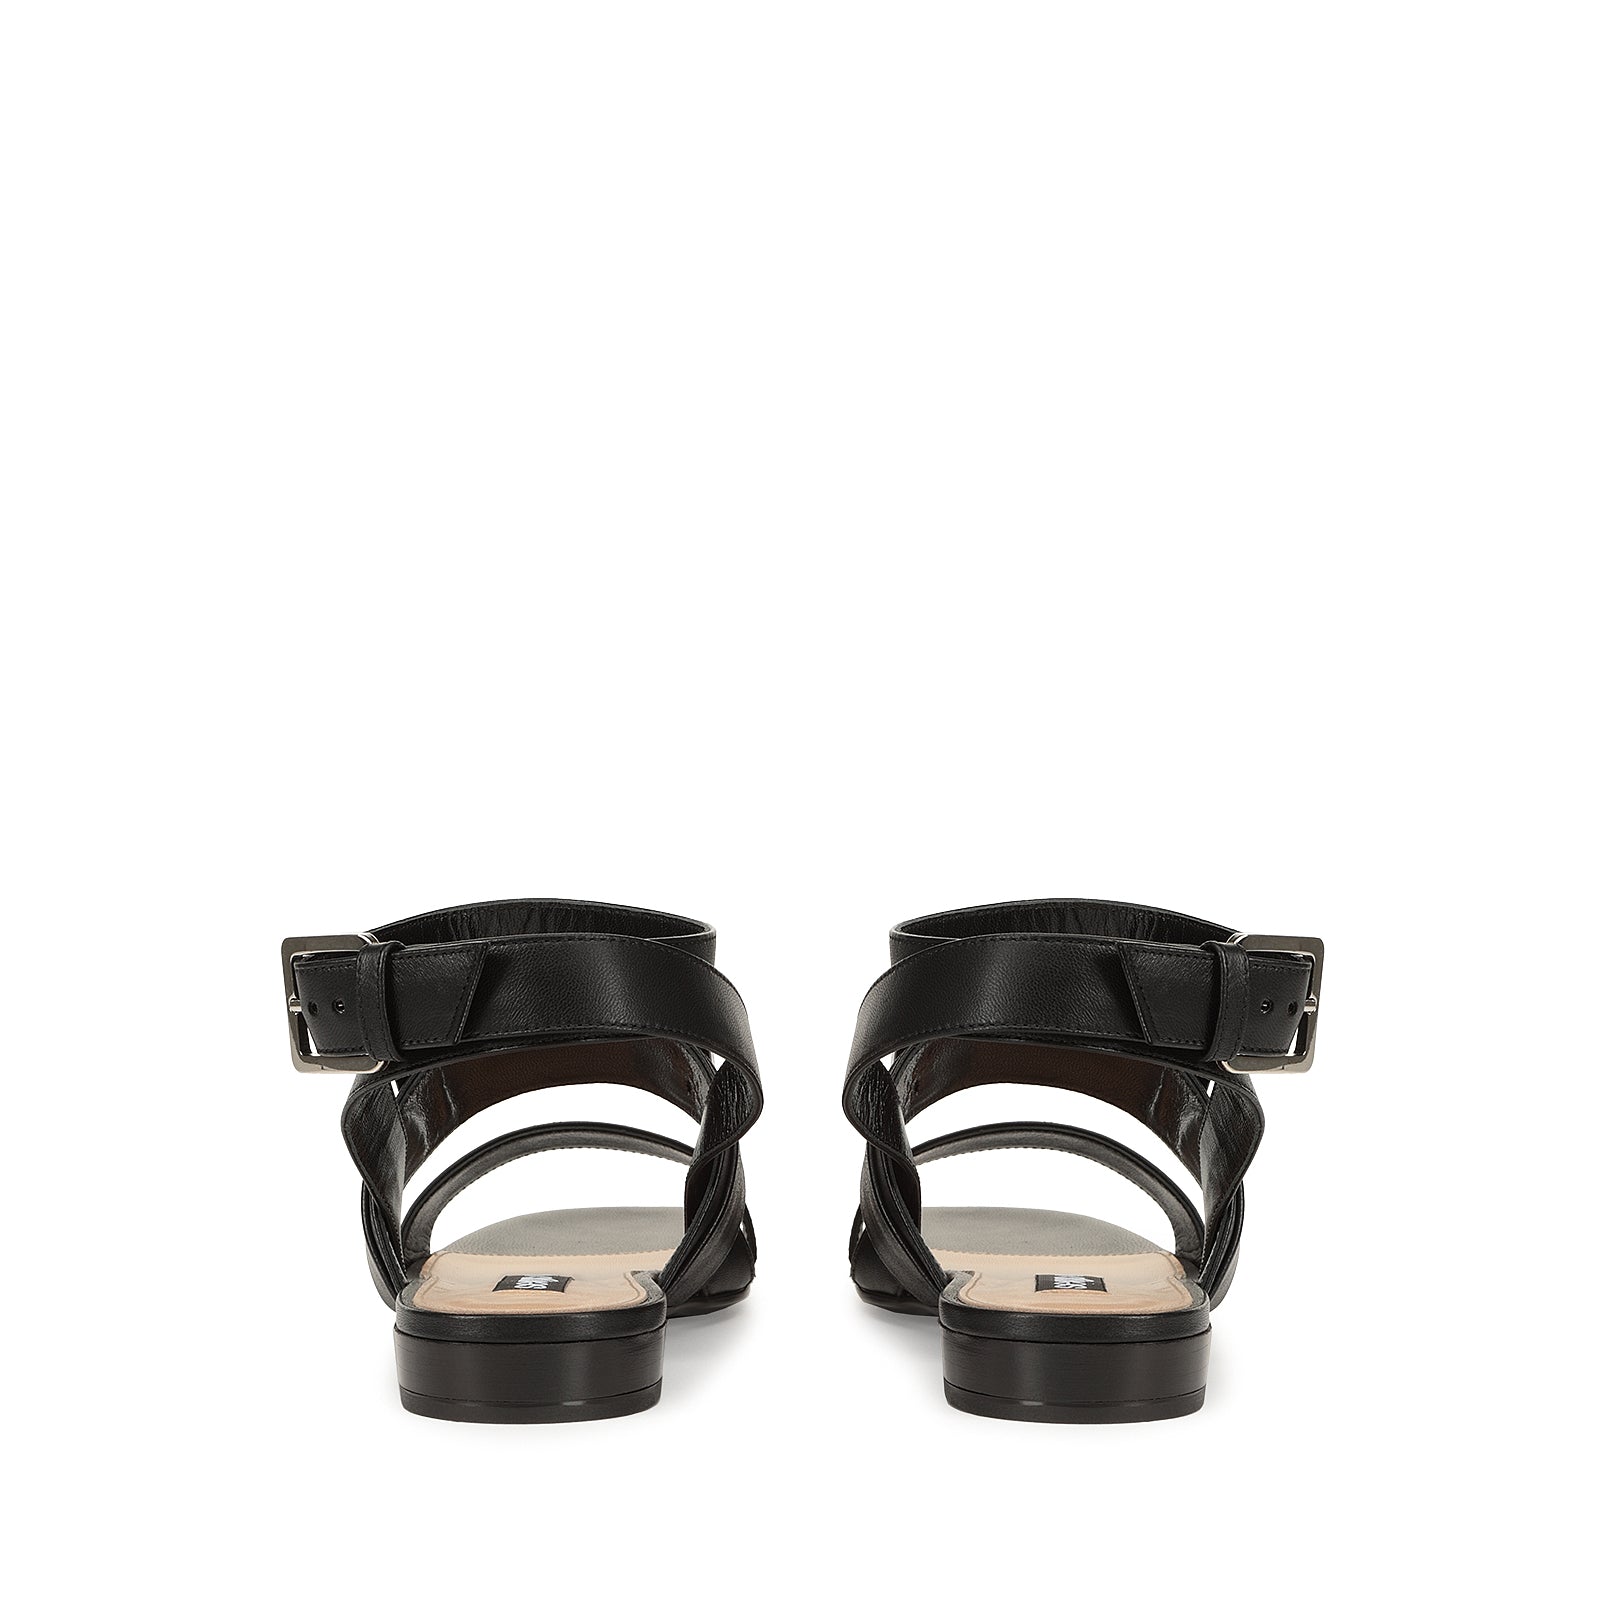 Sr Prince flat sandals with straps - Nero